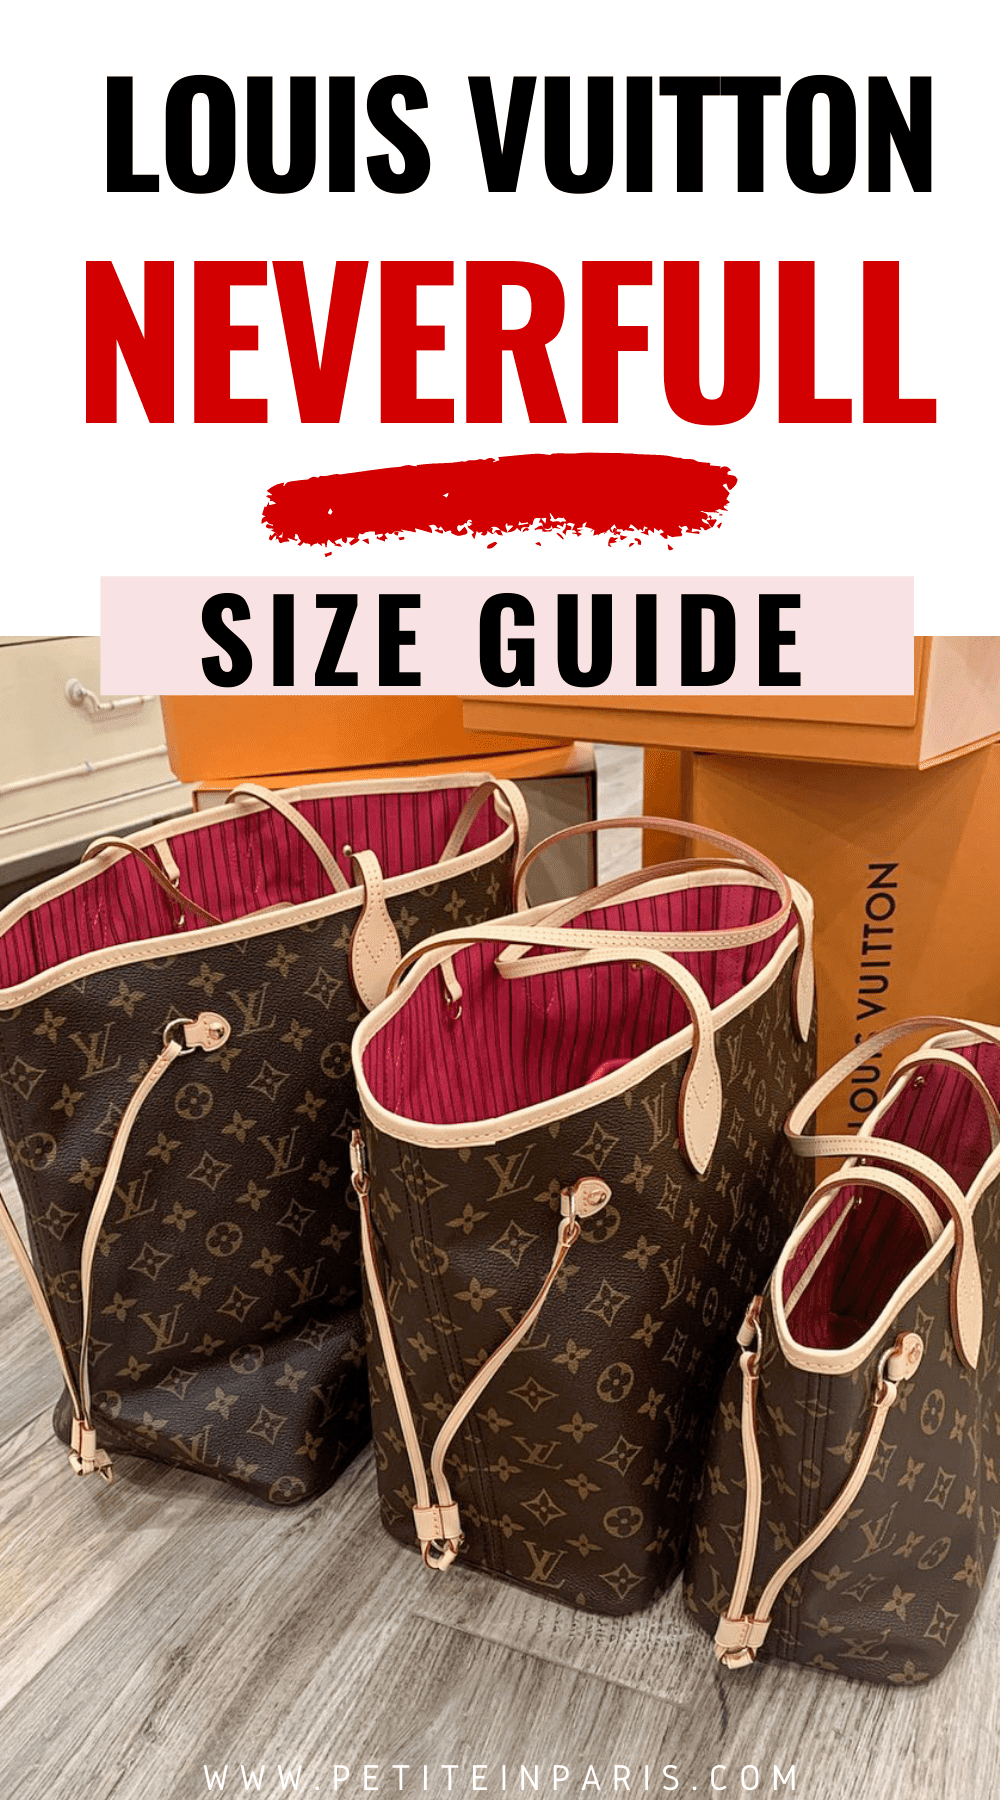 Neverfull Size Guide